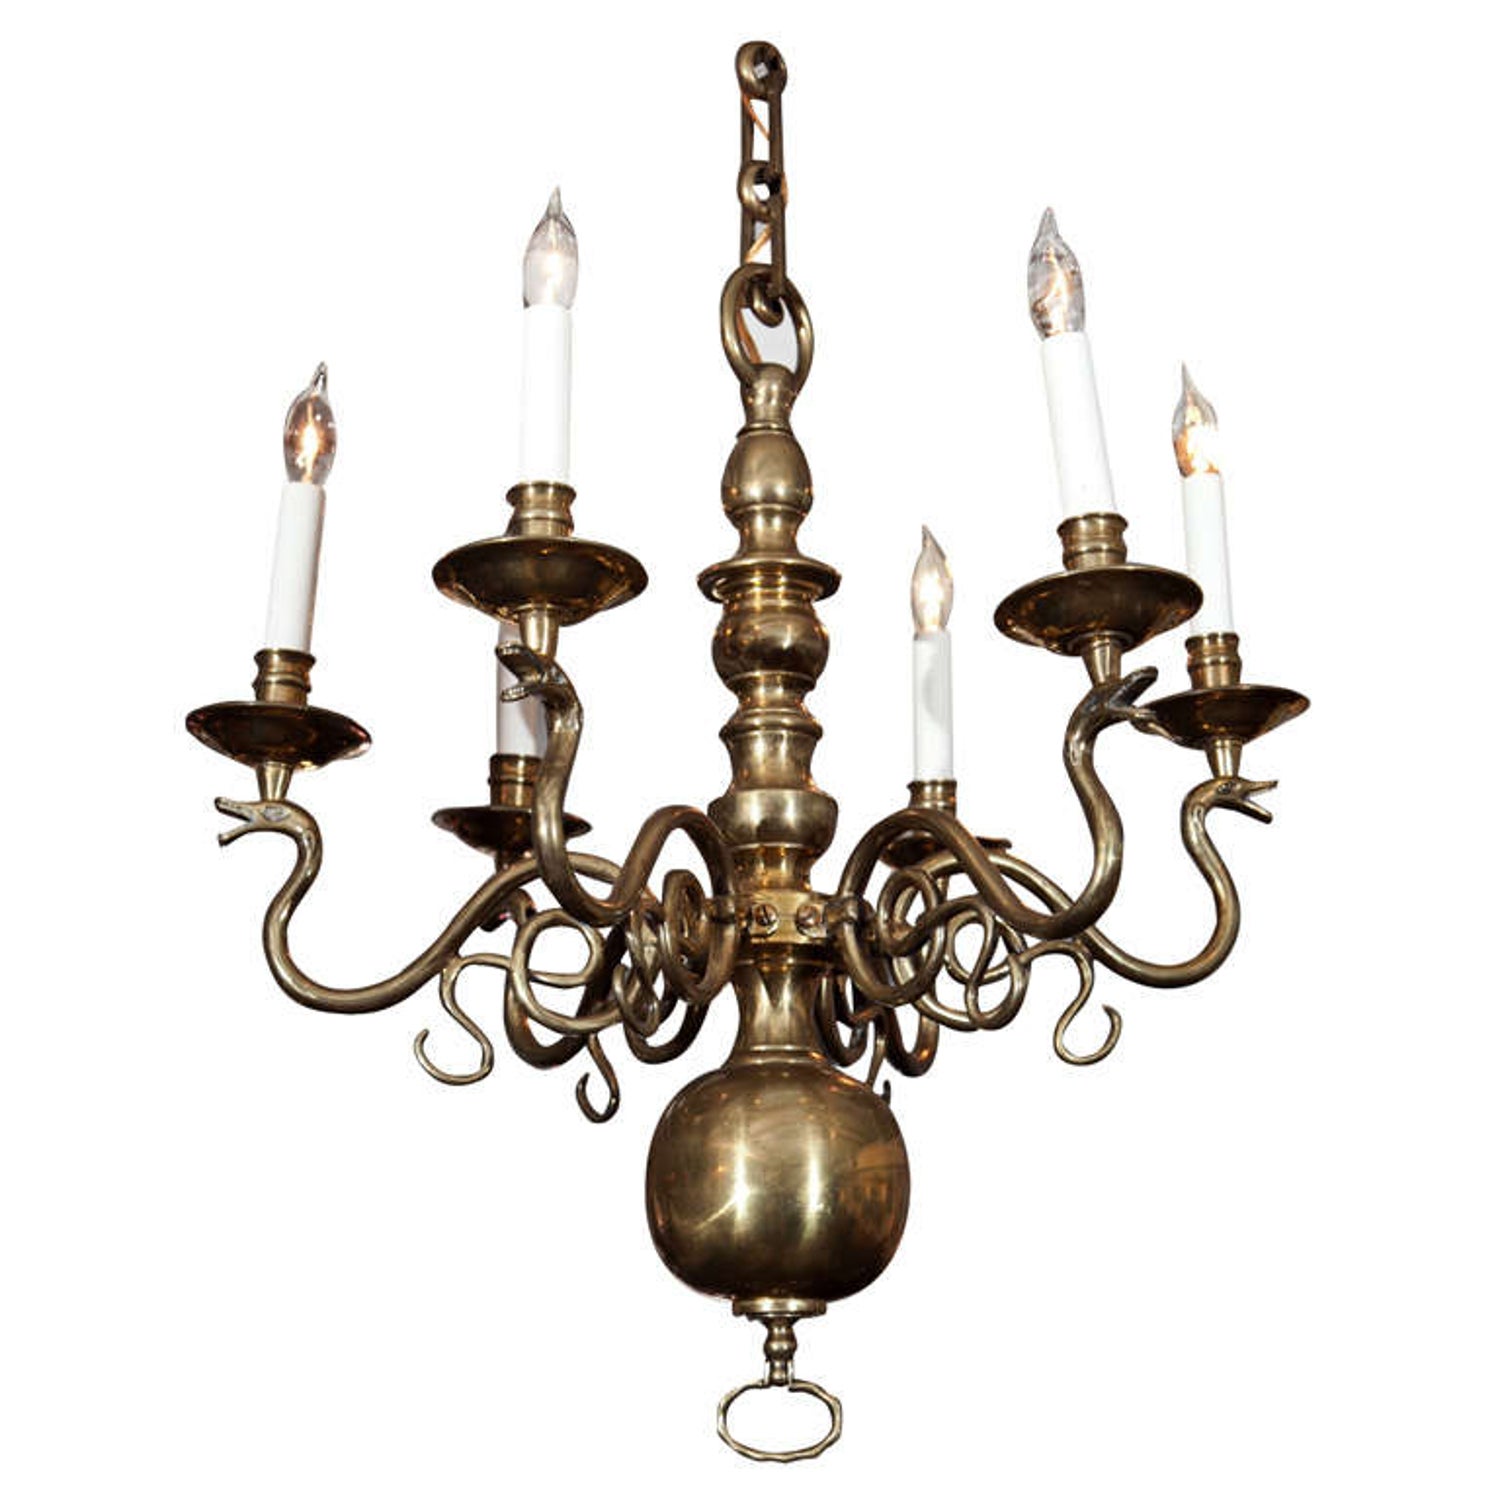 English Brass Six-Arm Chandelier For Sale at 1stDibs